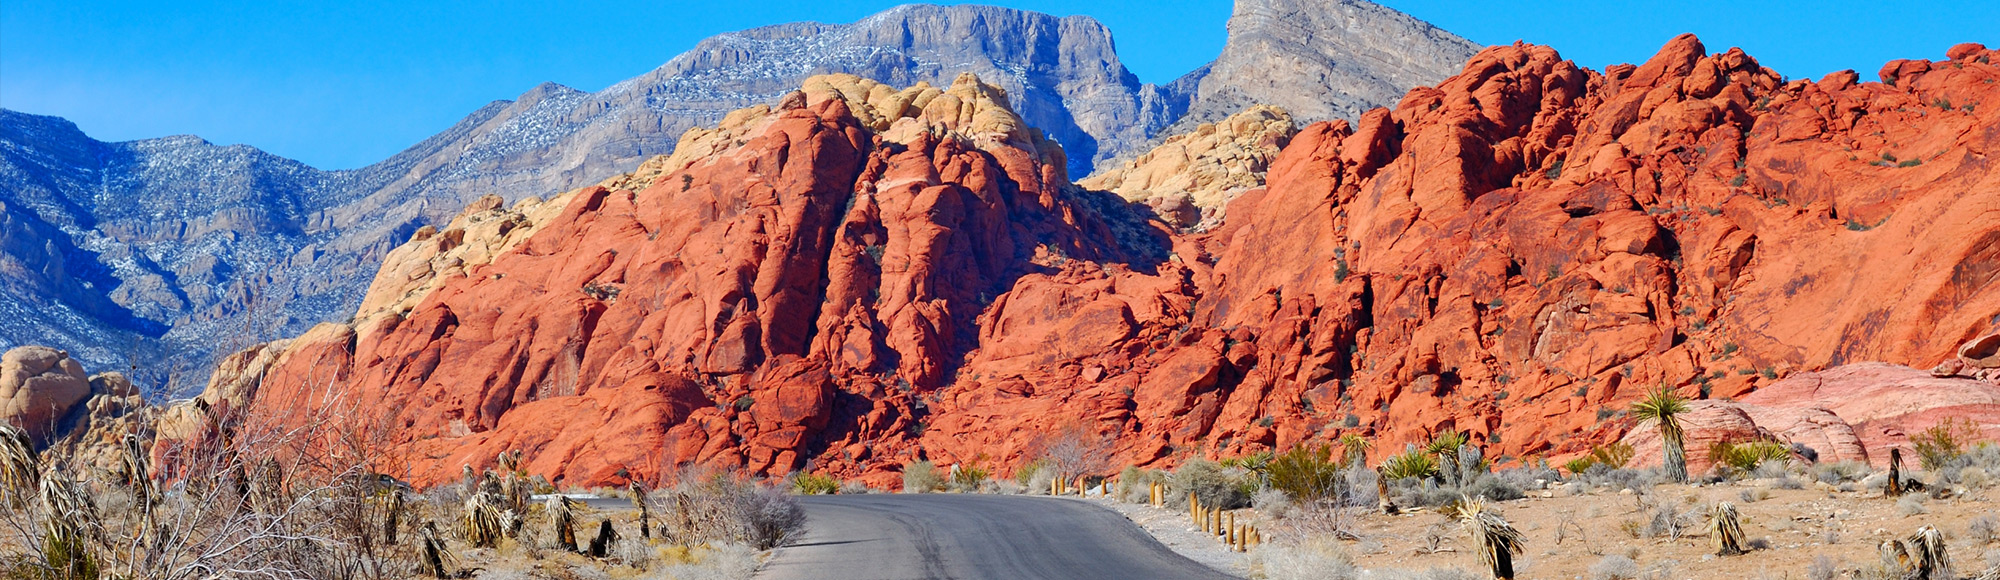 red rock canyon tour from las vegas